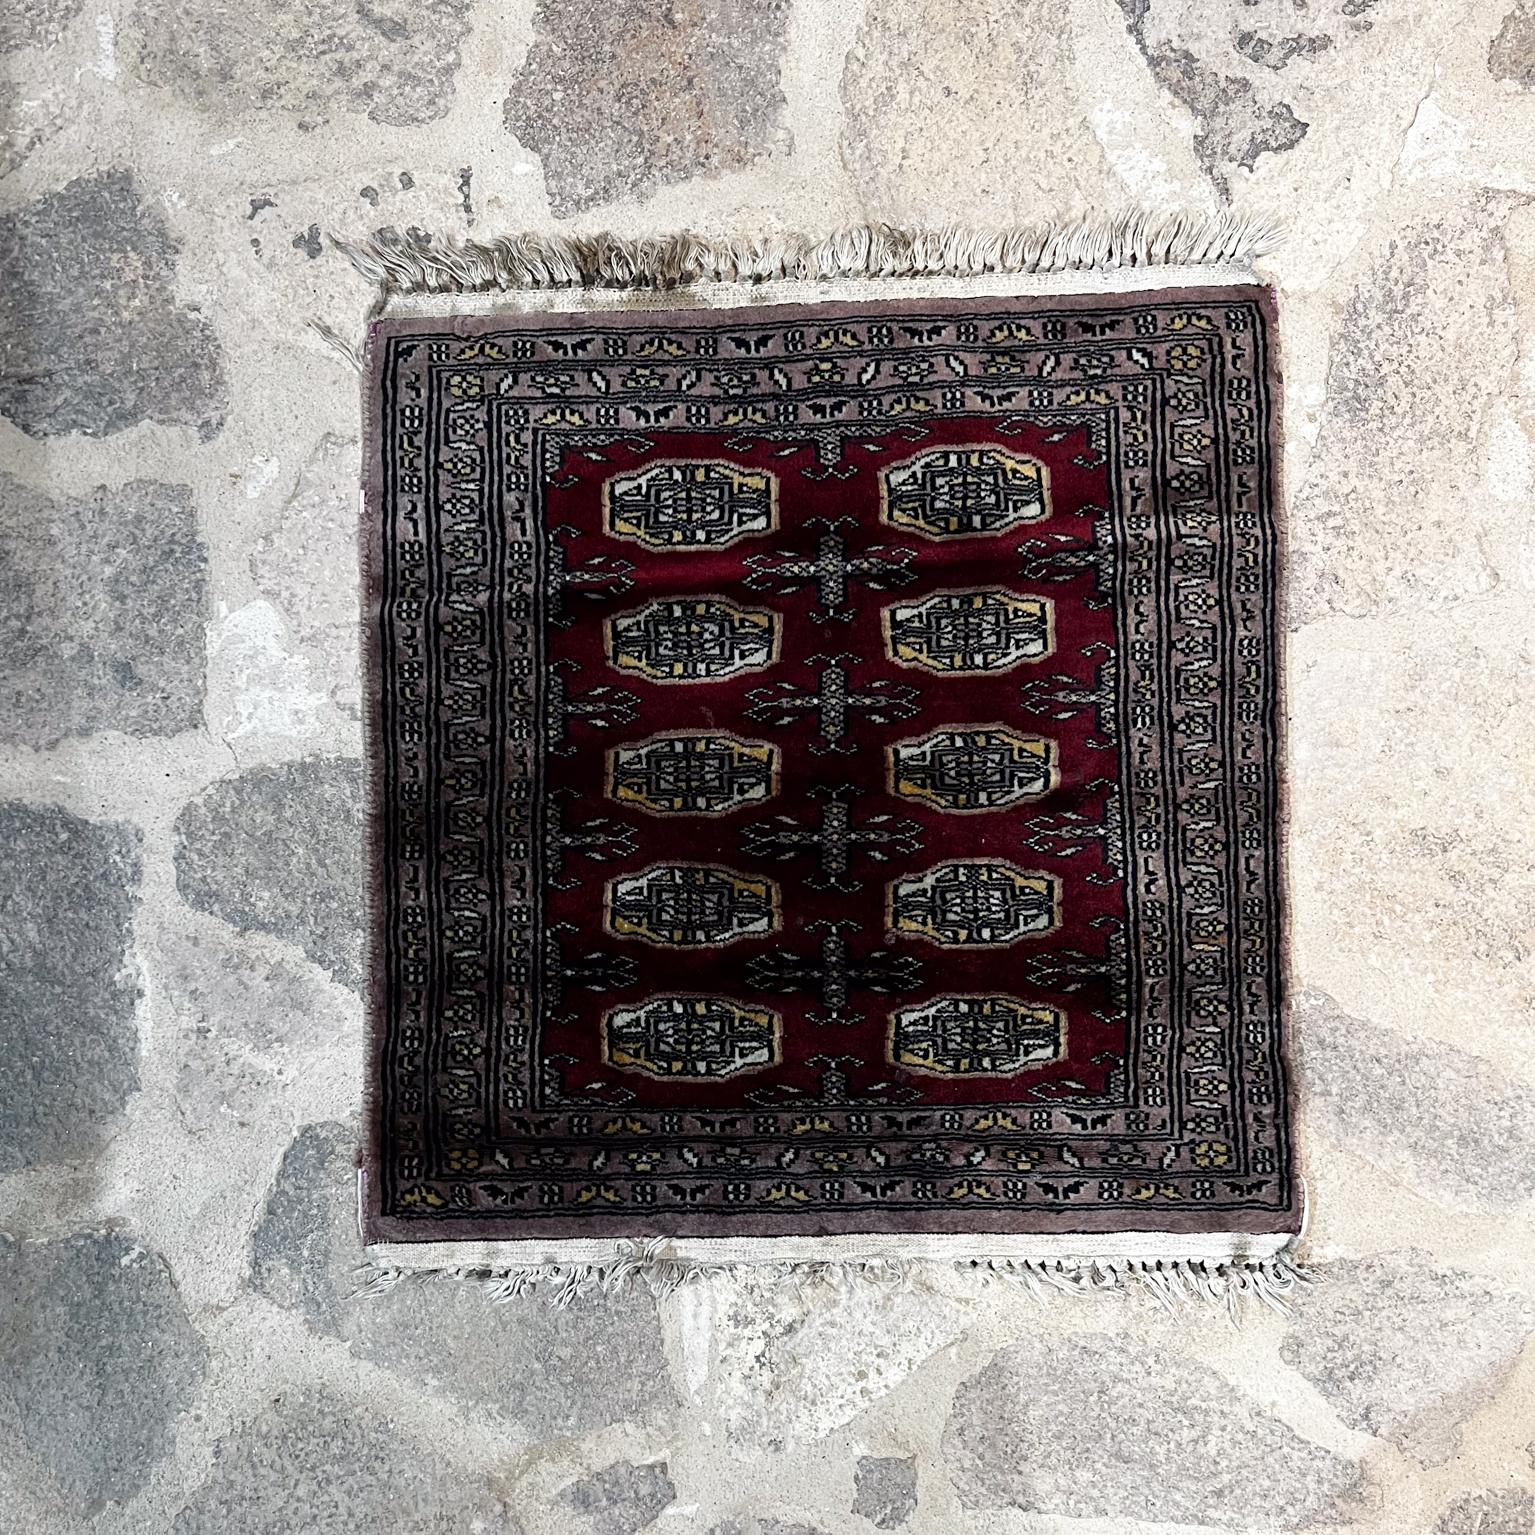 Small Rug Middle Eastern Wall Art Tapestry
Handmade
24.5 w x 28.5 tall
Preowned original vintage condition.
See images please.
